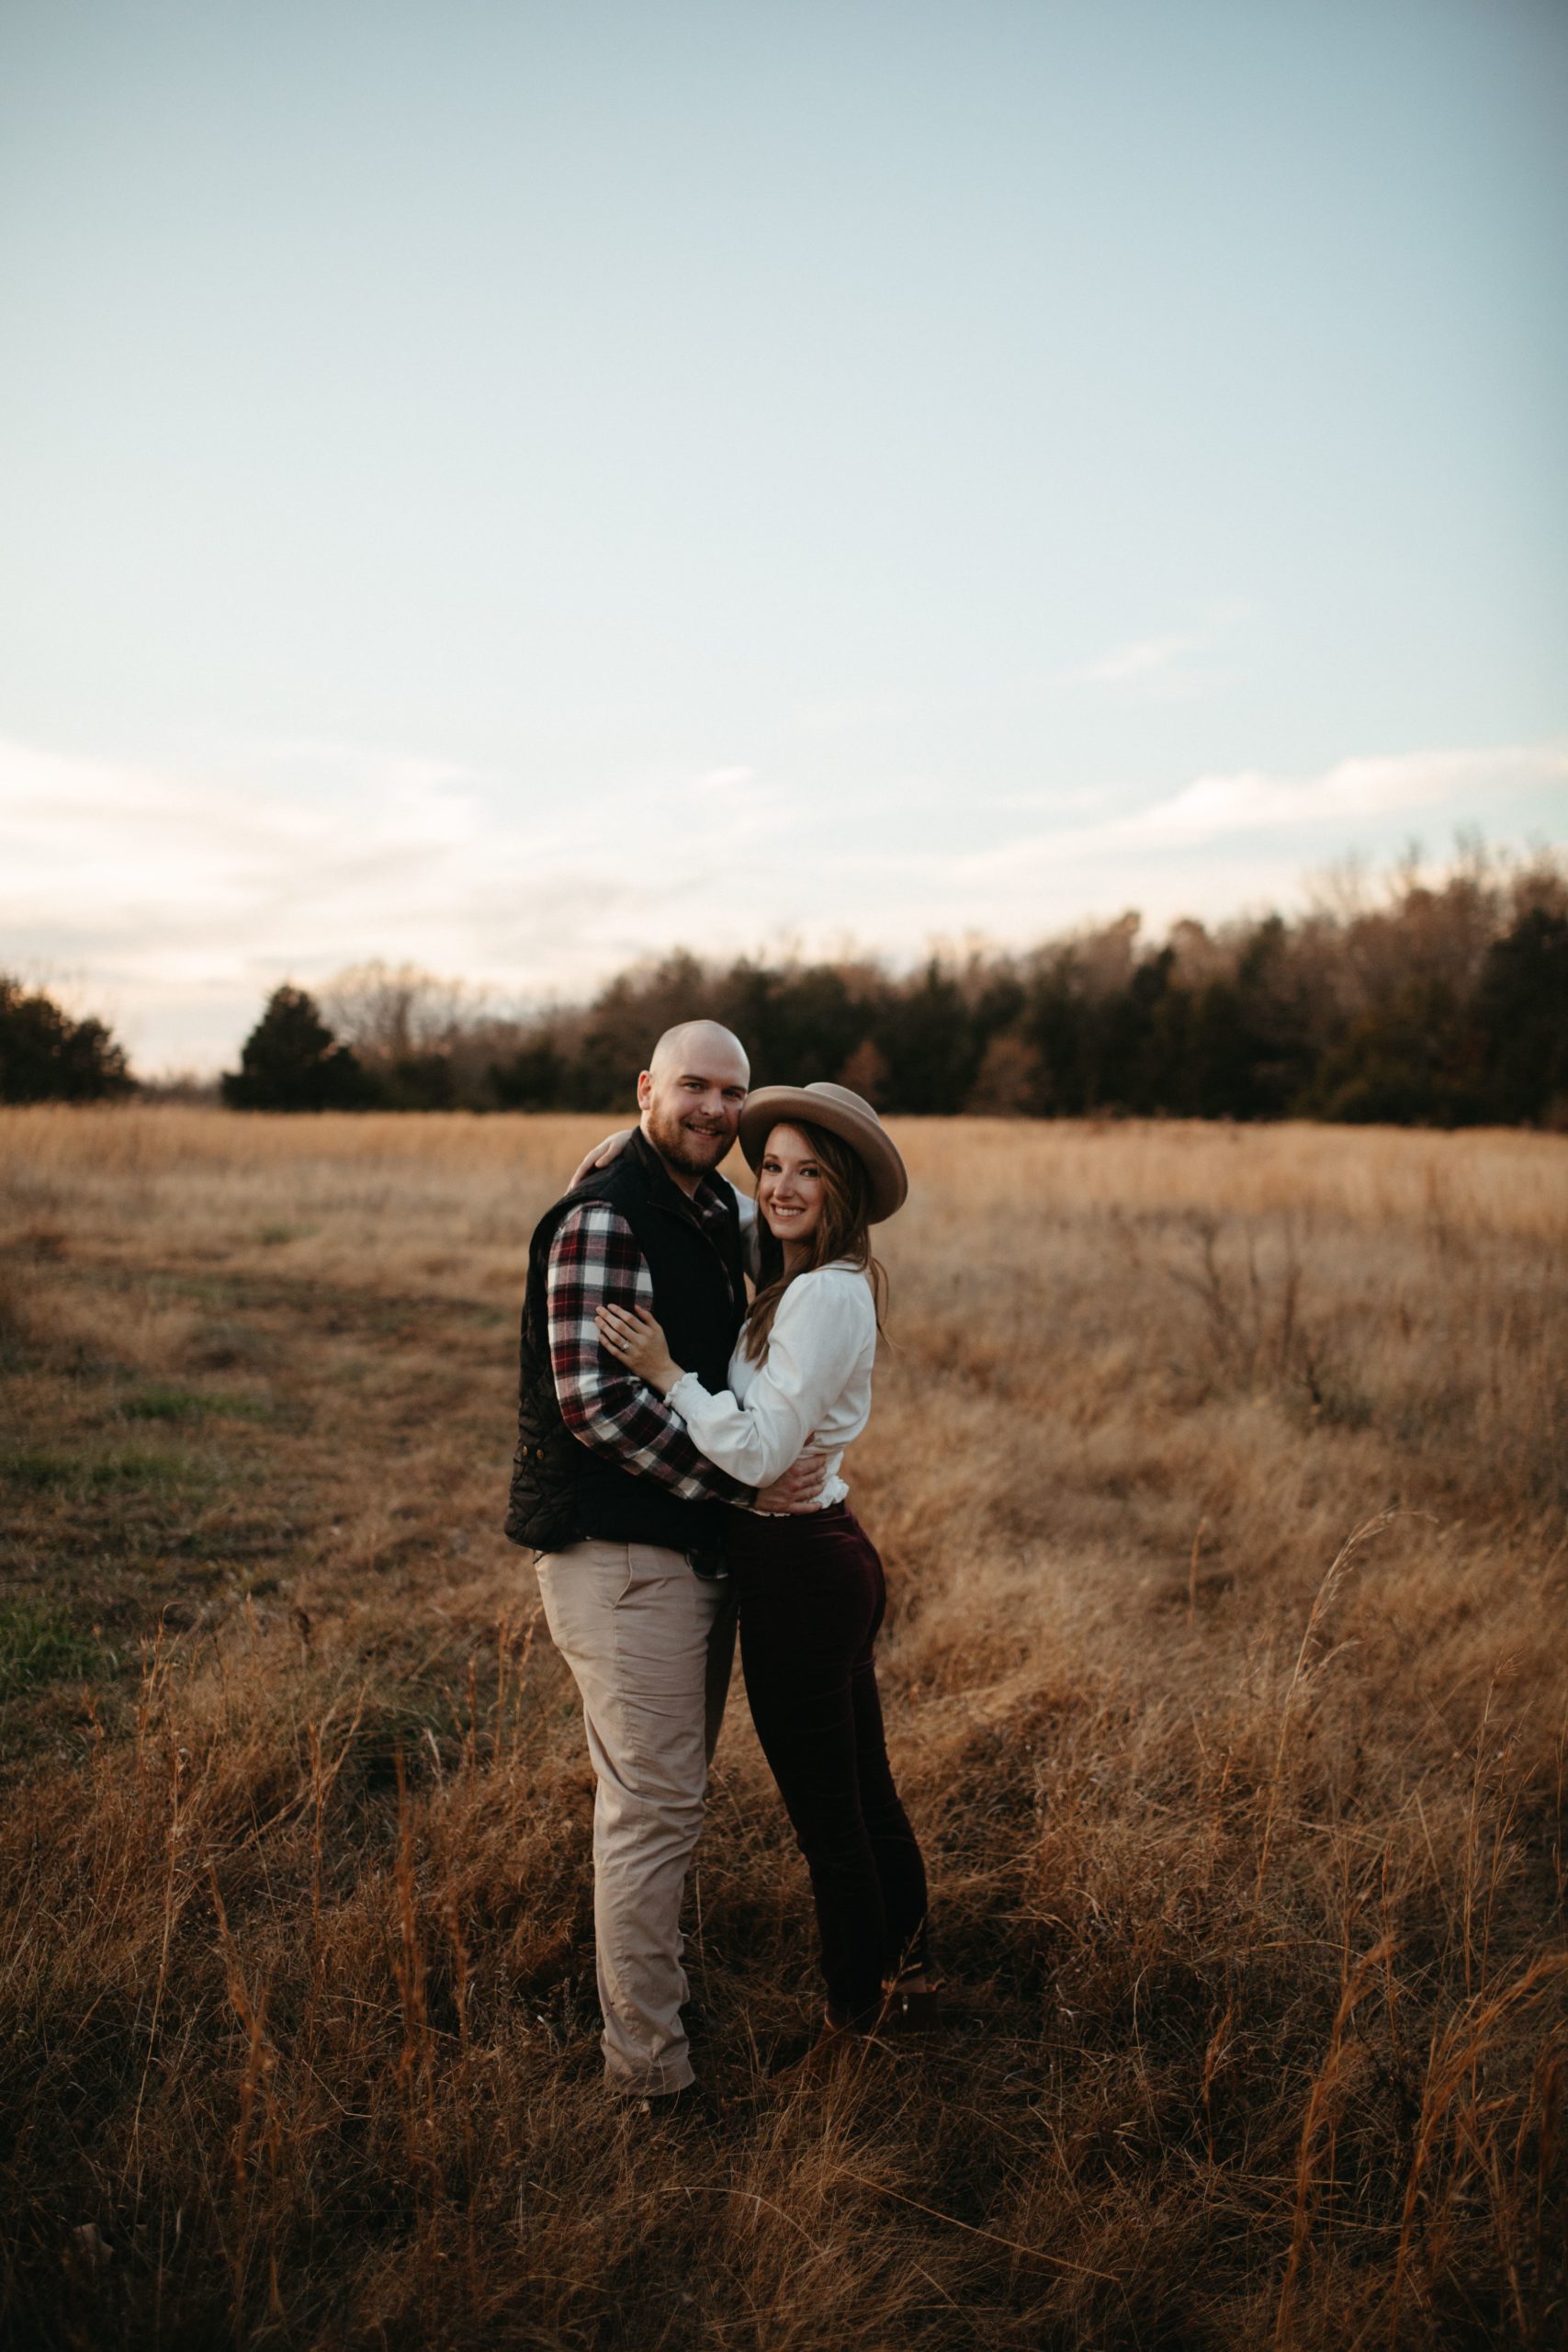 asking big question in engagement photos in Springfield mo area